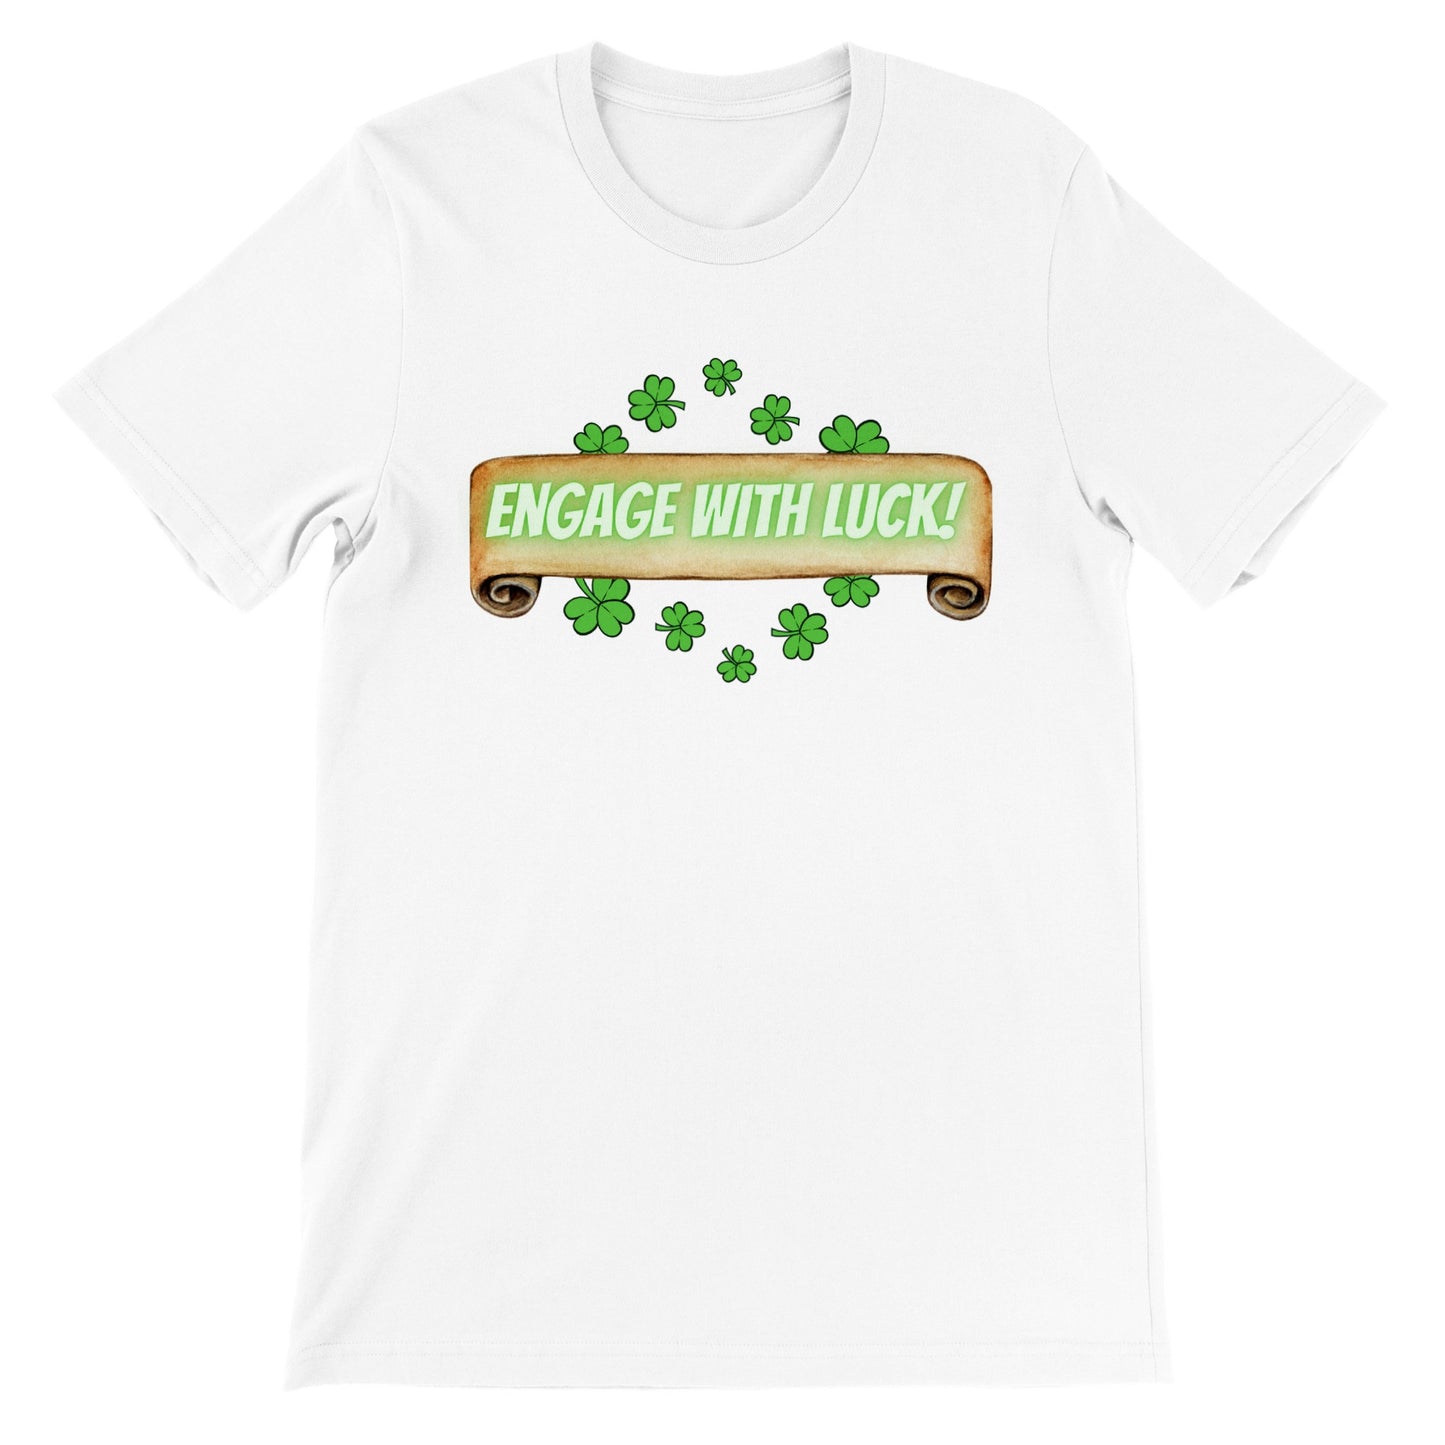 "Engage With Luck!" Tee